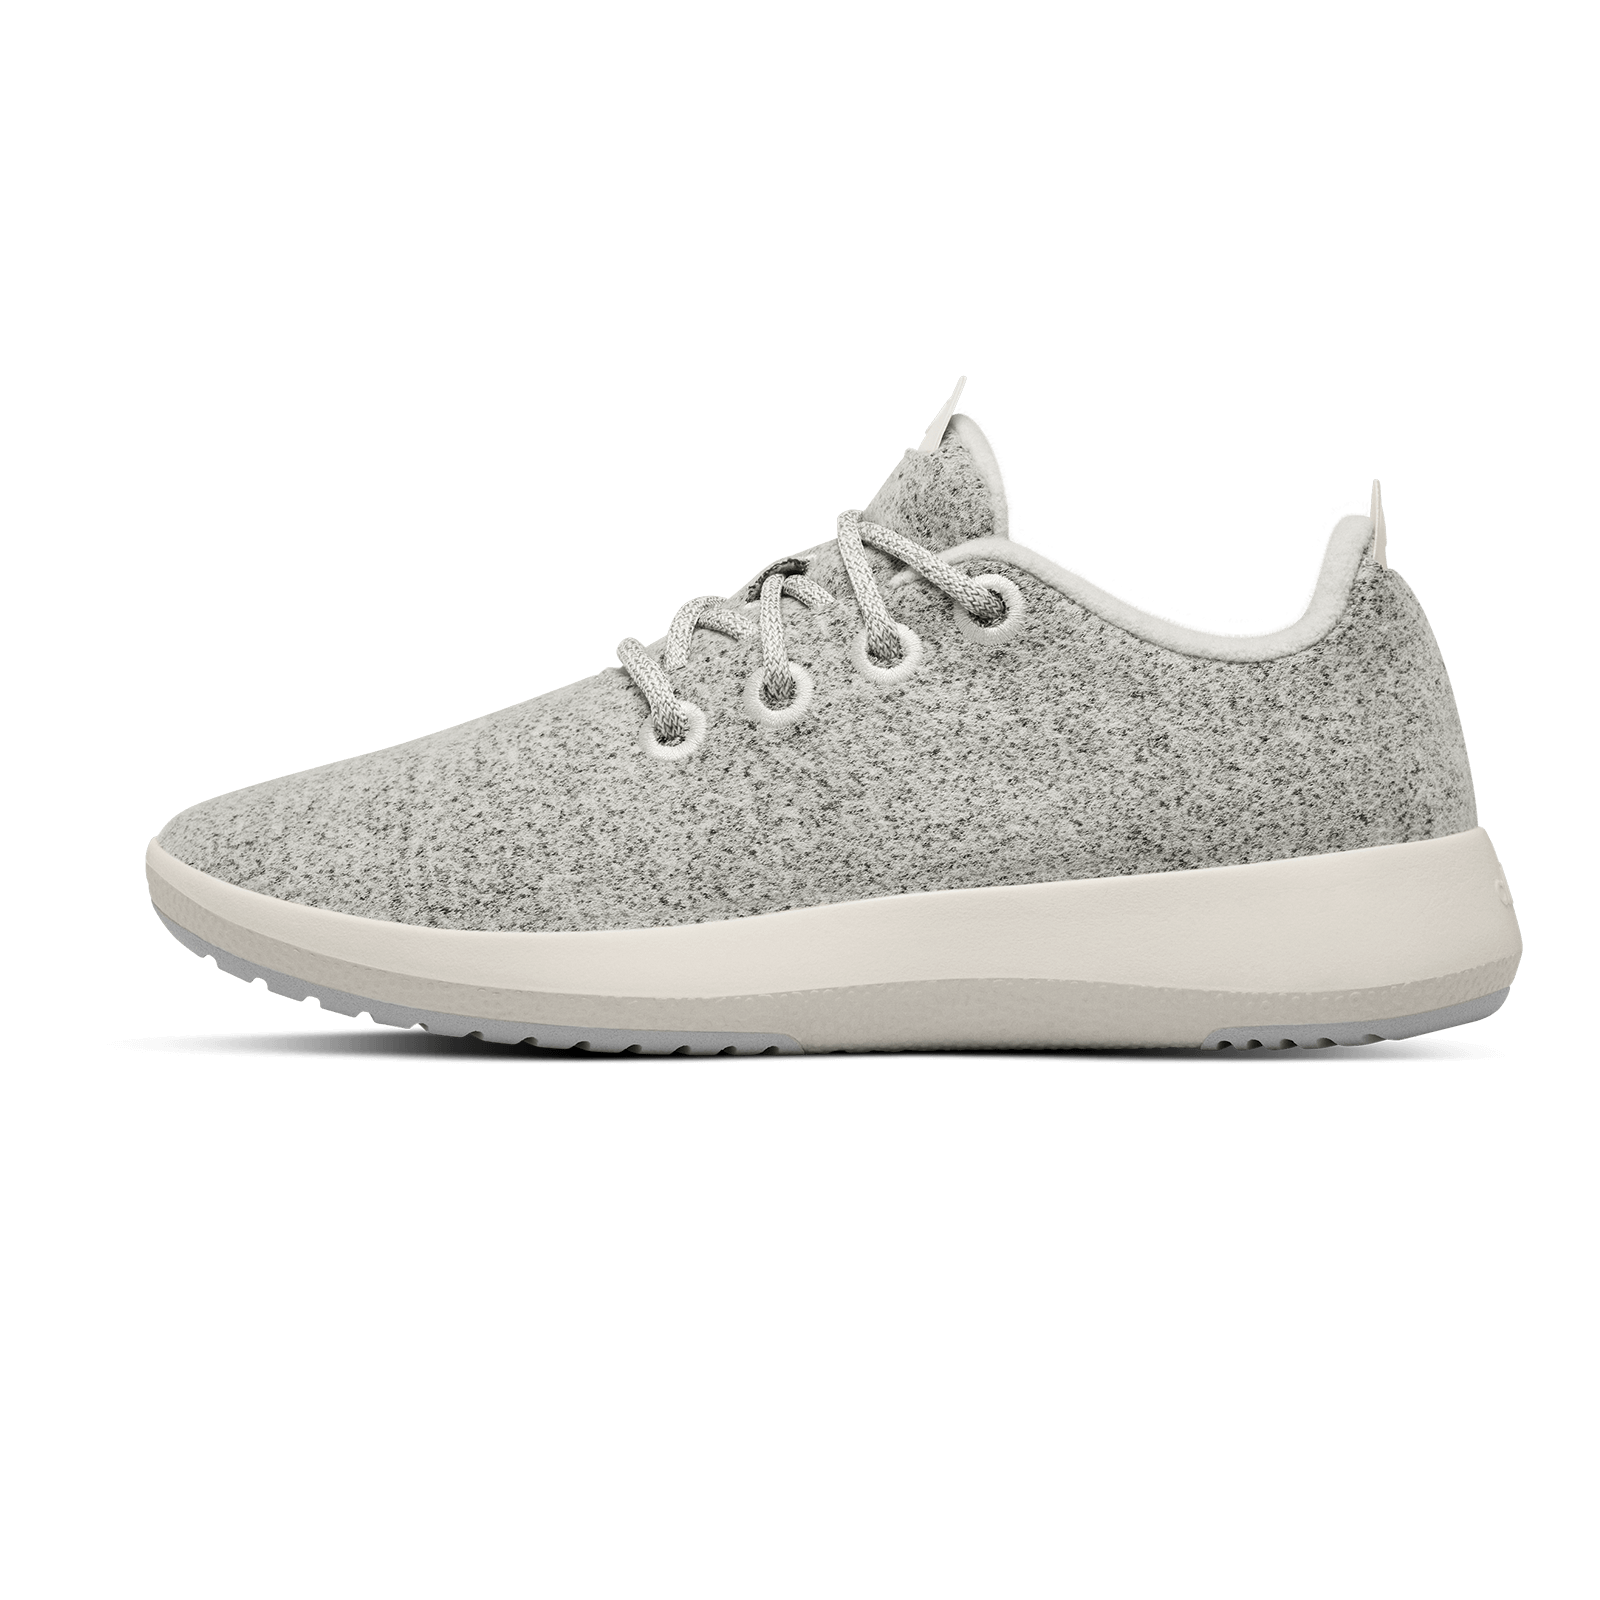 The Allbirds Wool Runners Are on Sale for Up to 42% Off